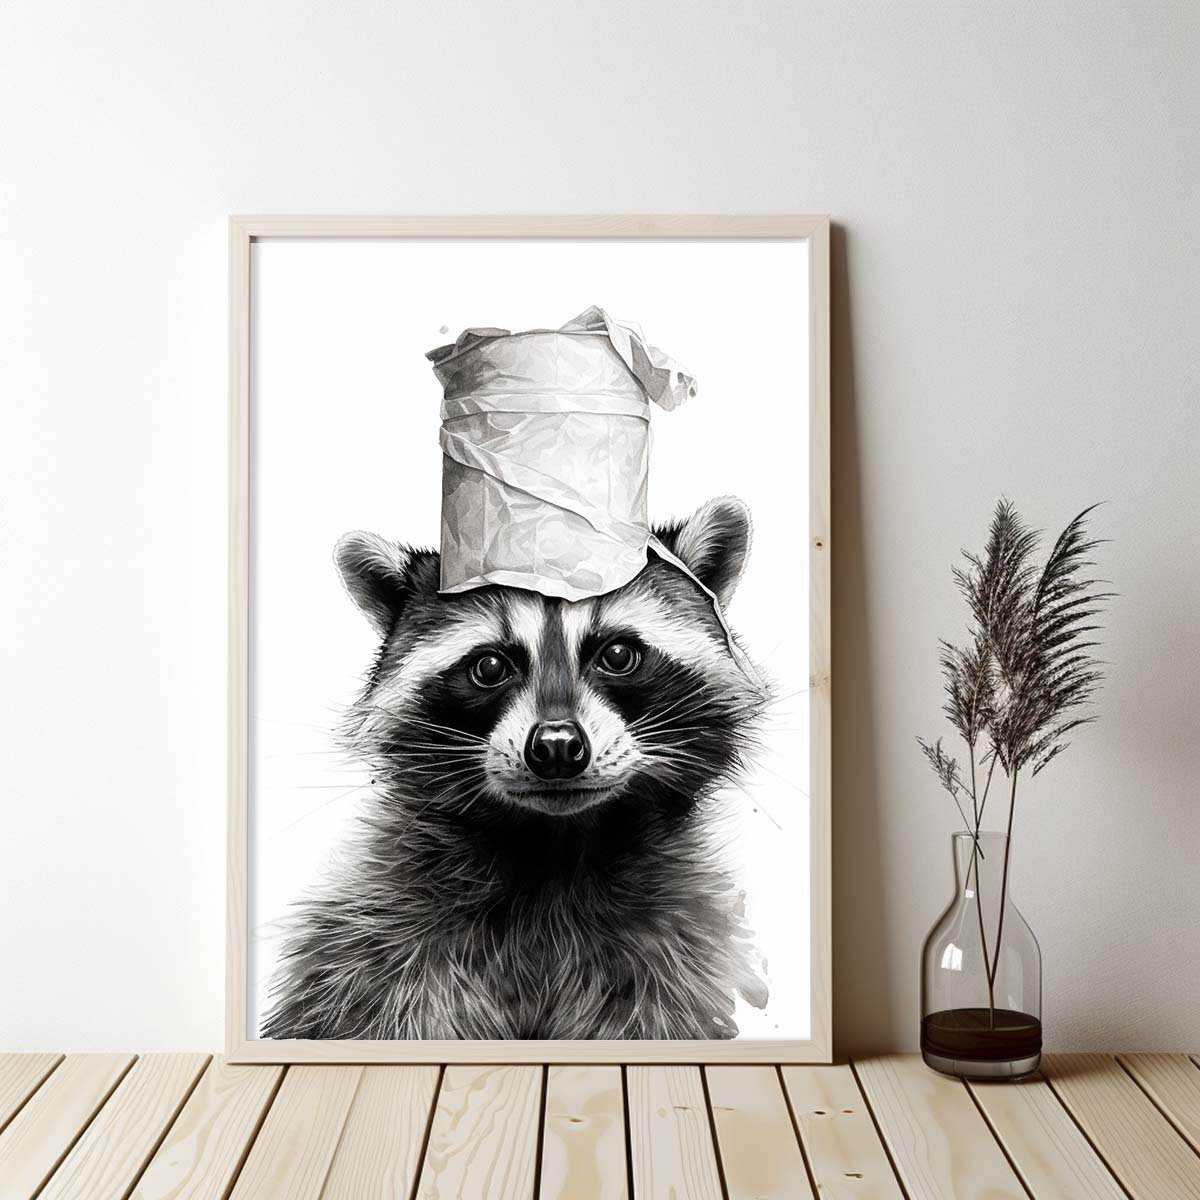 Racoon With Toilet Paper Canvas Art, Racoon With Toilet Paper, Funny Racoon Art, Bathroom Wall Decor, Home Decor, Bathroom Wall Art, Animal Wall Decor, Animal Decor, Animal Gift